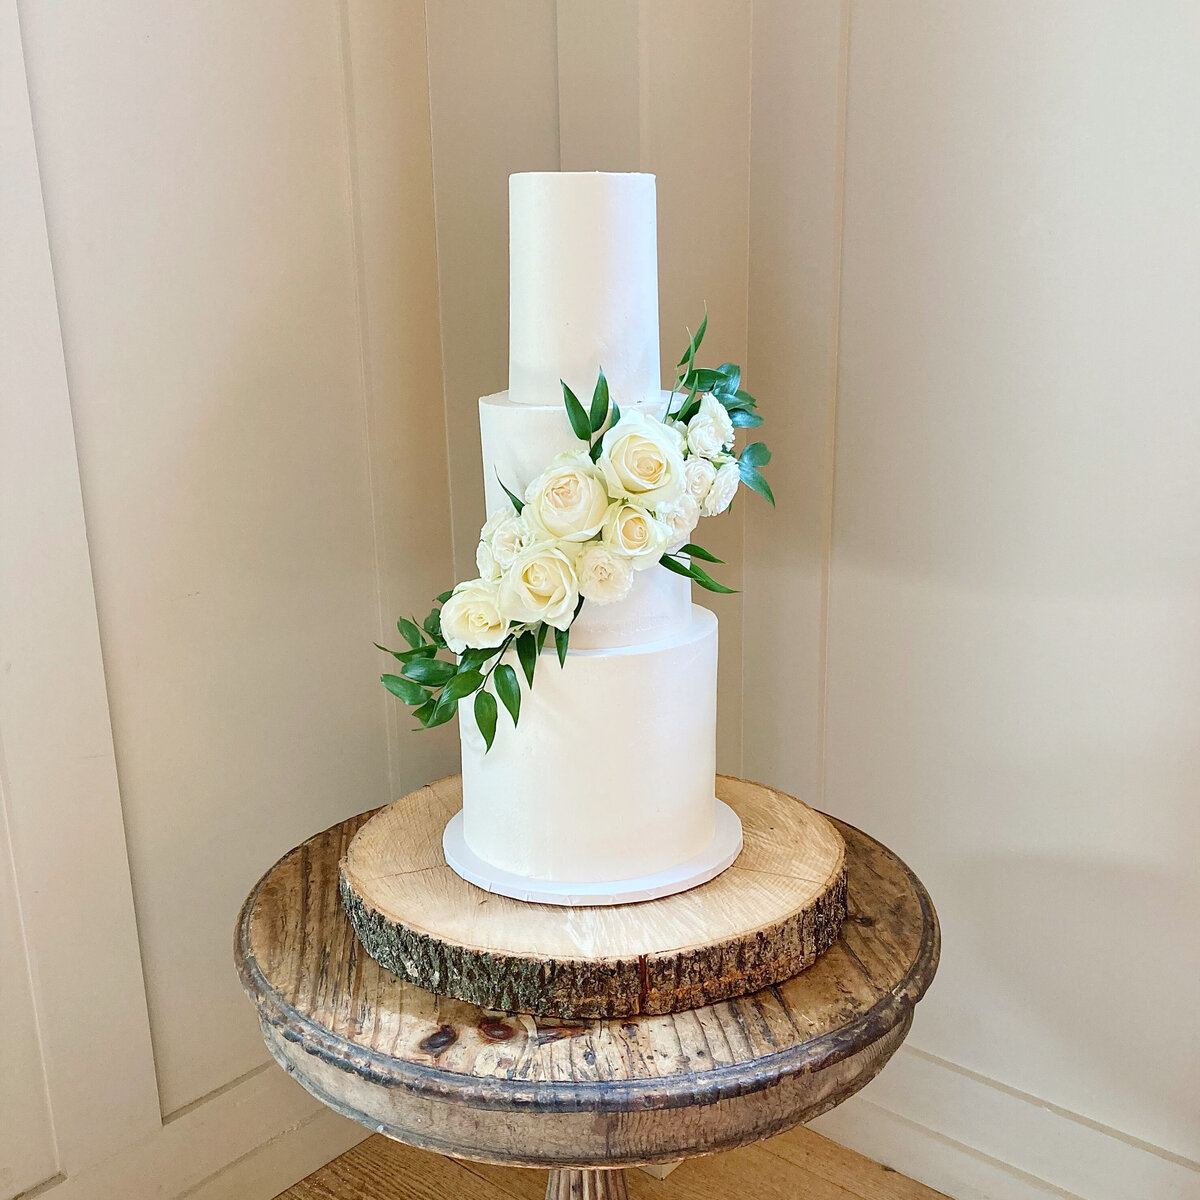 Simple white wedding cake with cascade of white roses